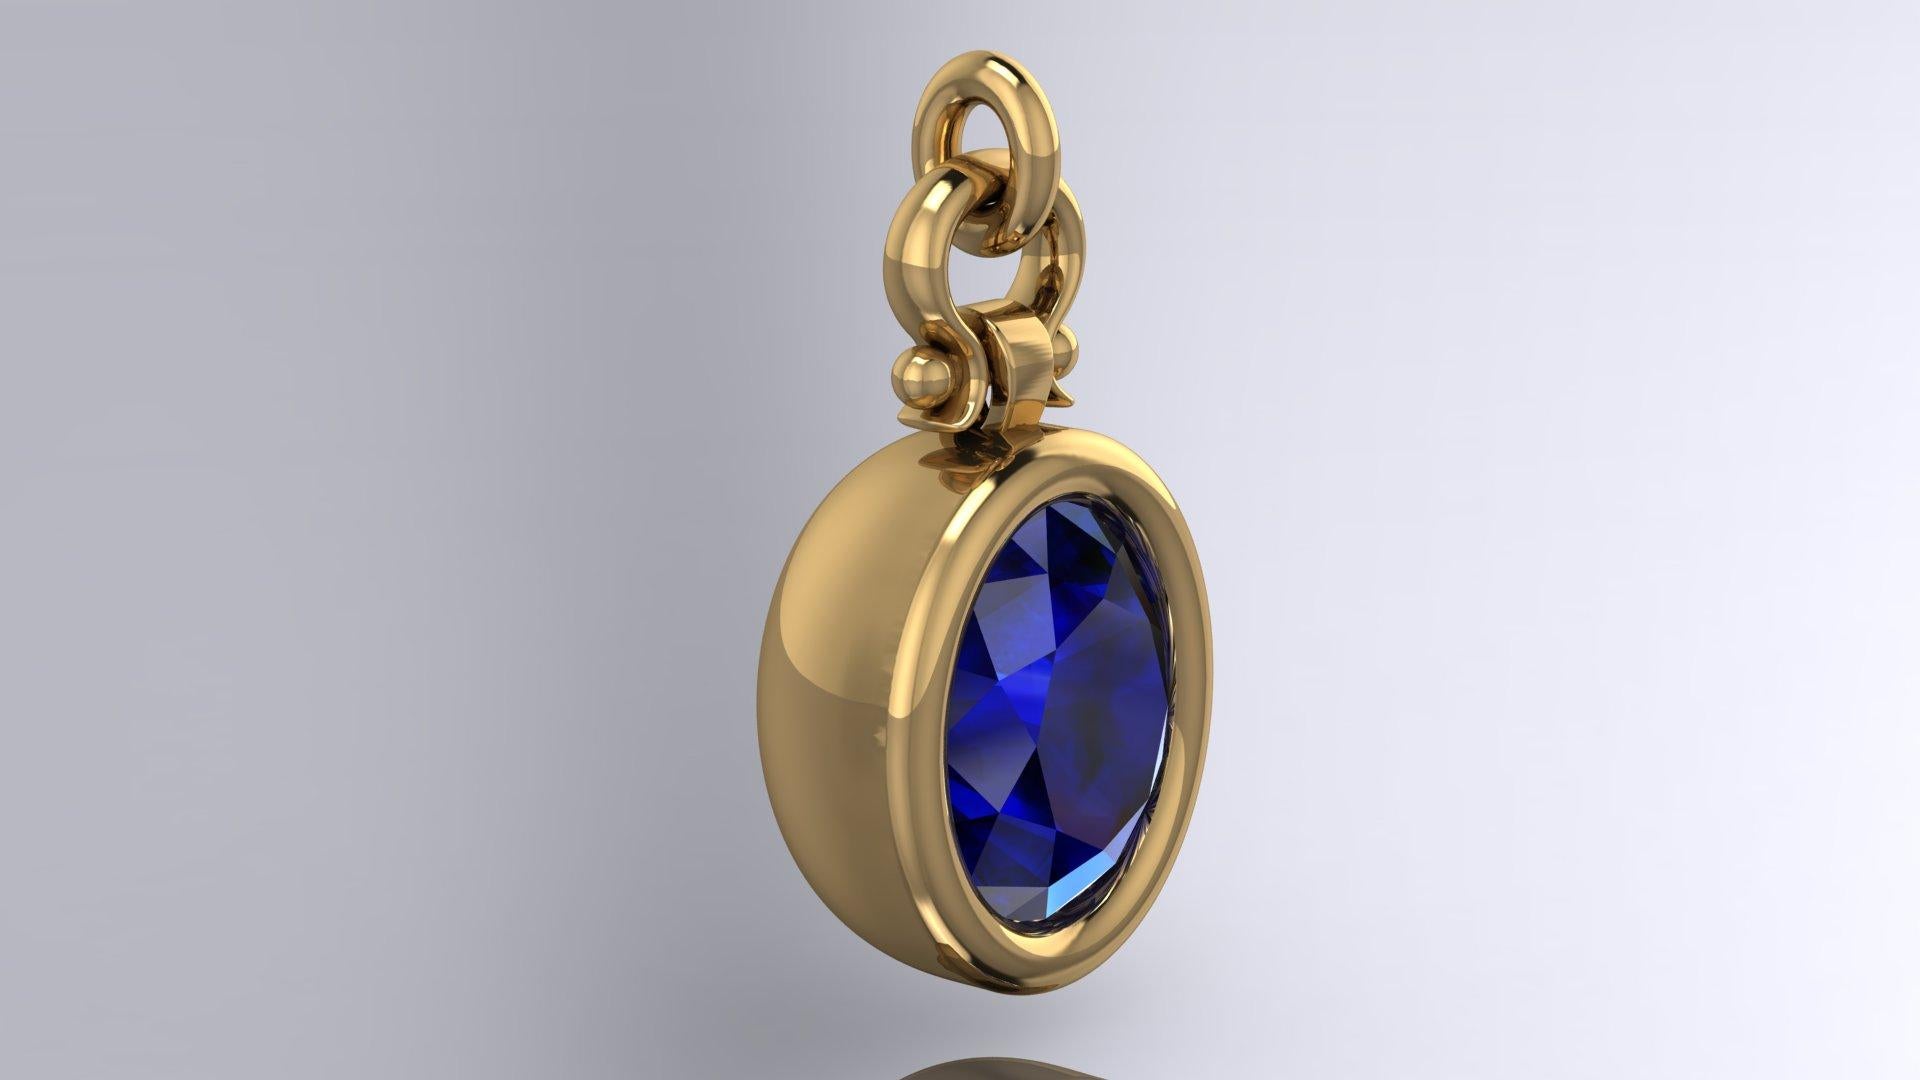 Berberyn Certified 4.12 Carat Oval Blue Sapphire Pendant Necklace in 18k In New Condition For Sale In Chicago, IL